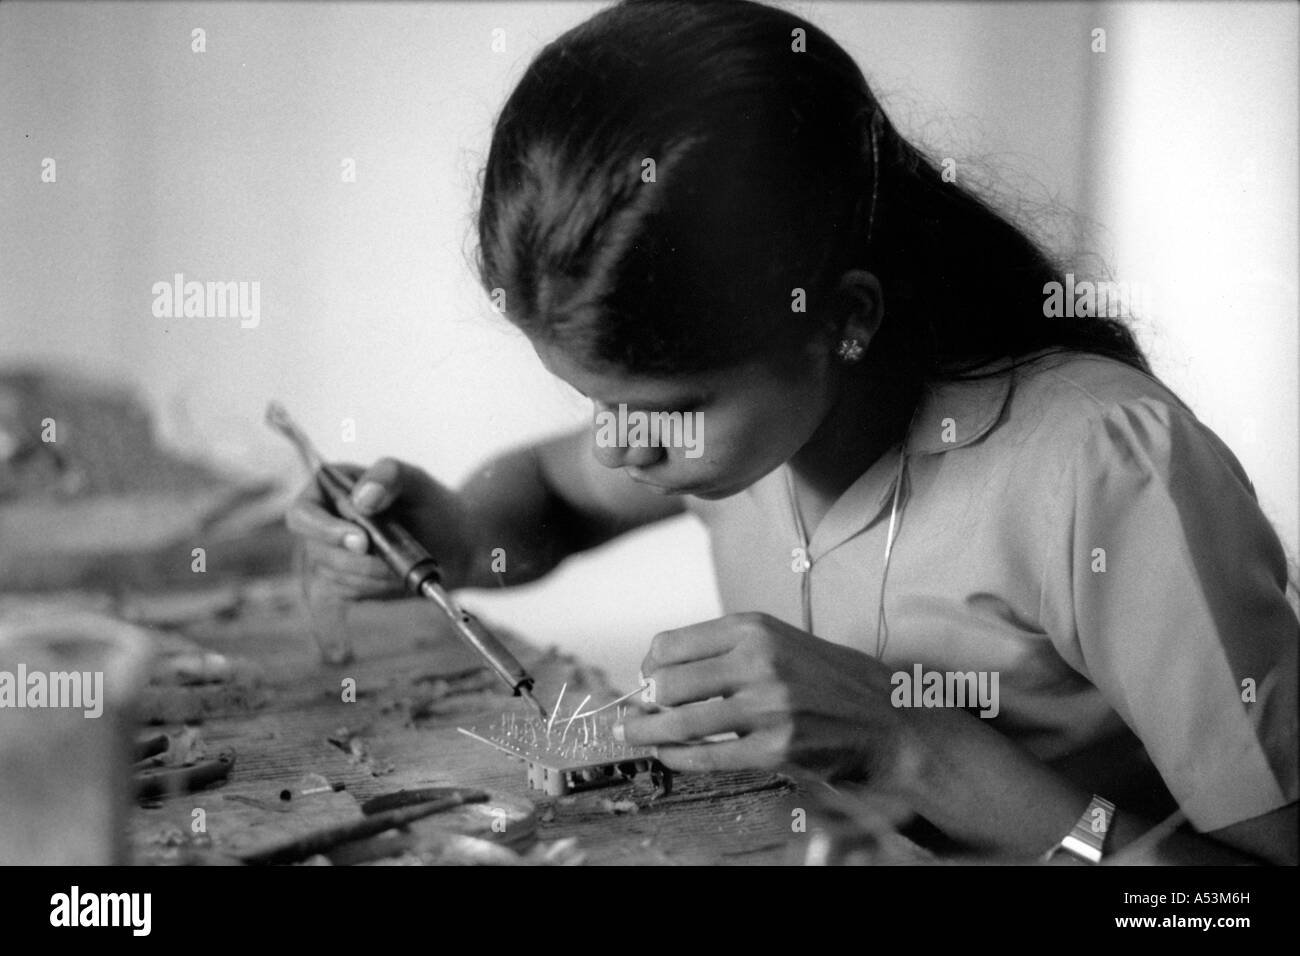 Painet ha1372 181 black and white clabor woman working electronics factory kerala india country developing nation Stock Photo